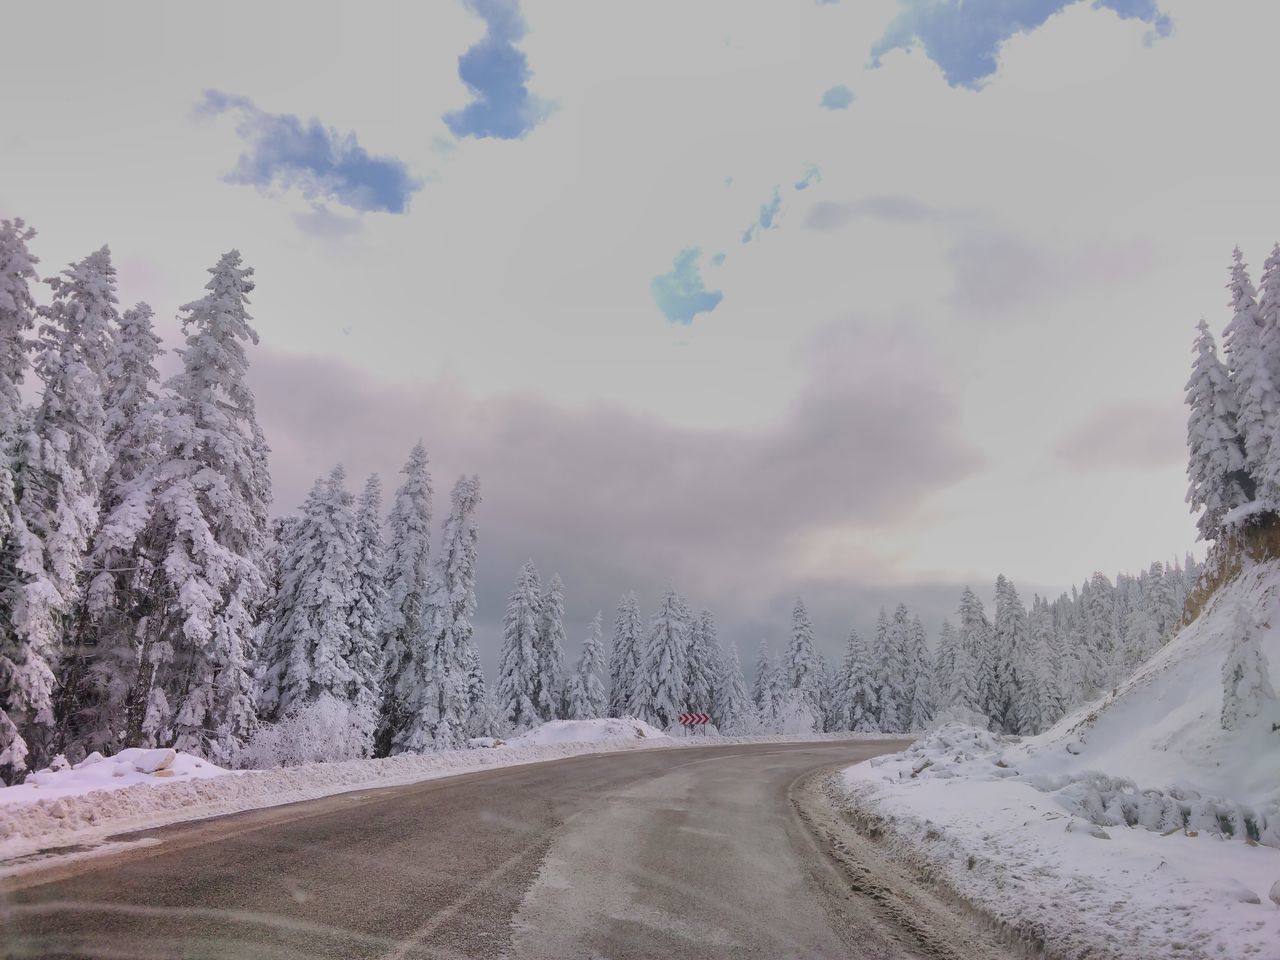 snow, winter, cold temperature, season, weather, covering, tree, sky, road, the way forward, tranquility, tranquil scene, nature, beauty in nature, scenics, frozen, white color, landscape, covered, cloud - sky